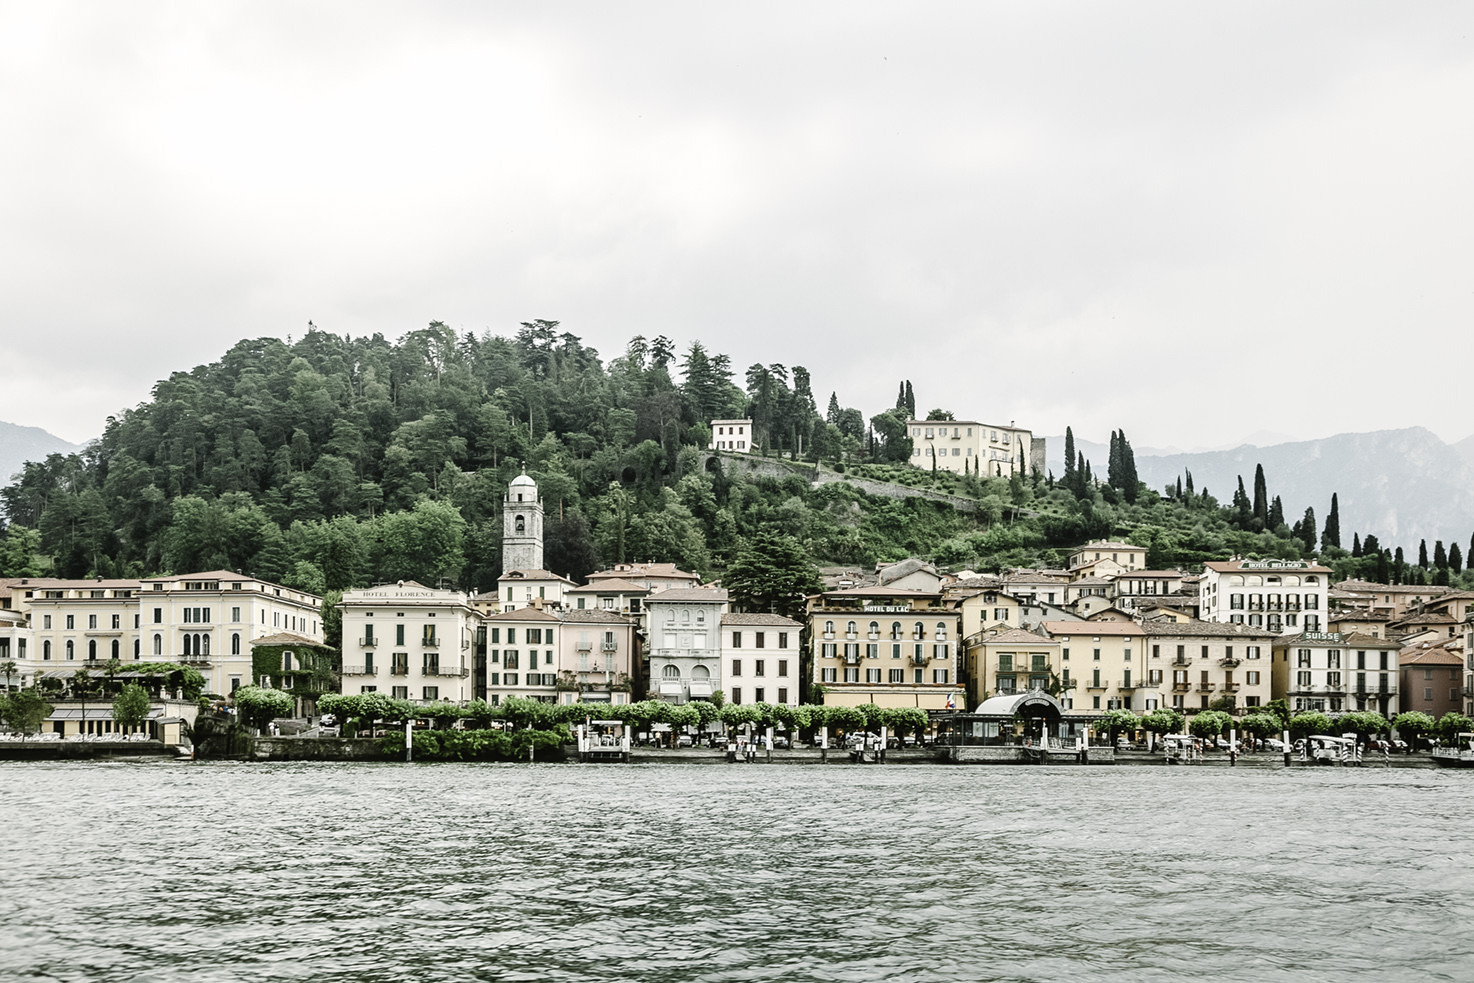 View of Bellagio from Lake Como